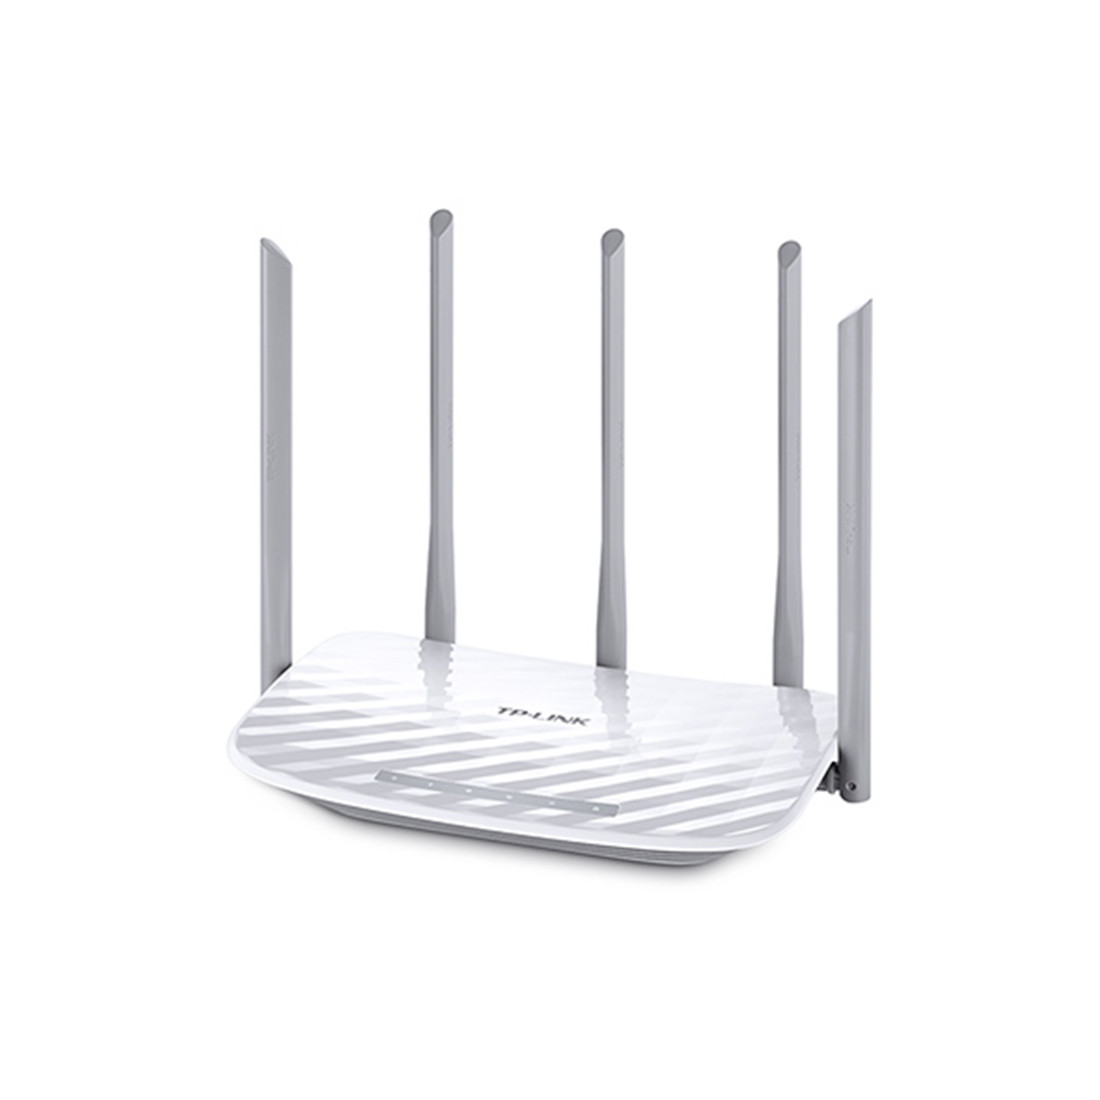 Маршрутизатор TP-Link Archer C60